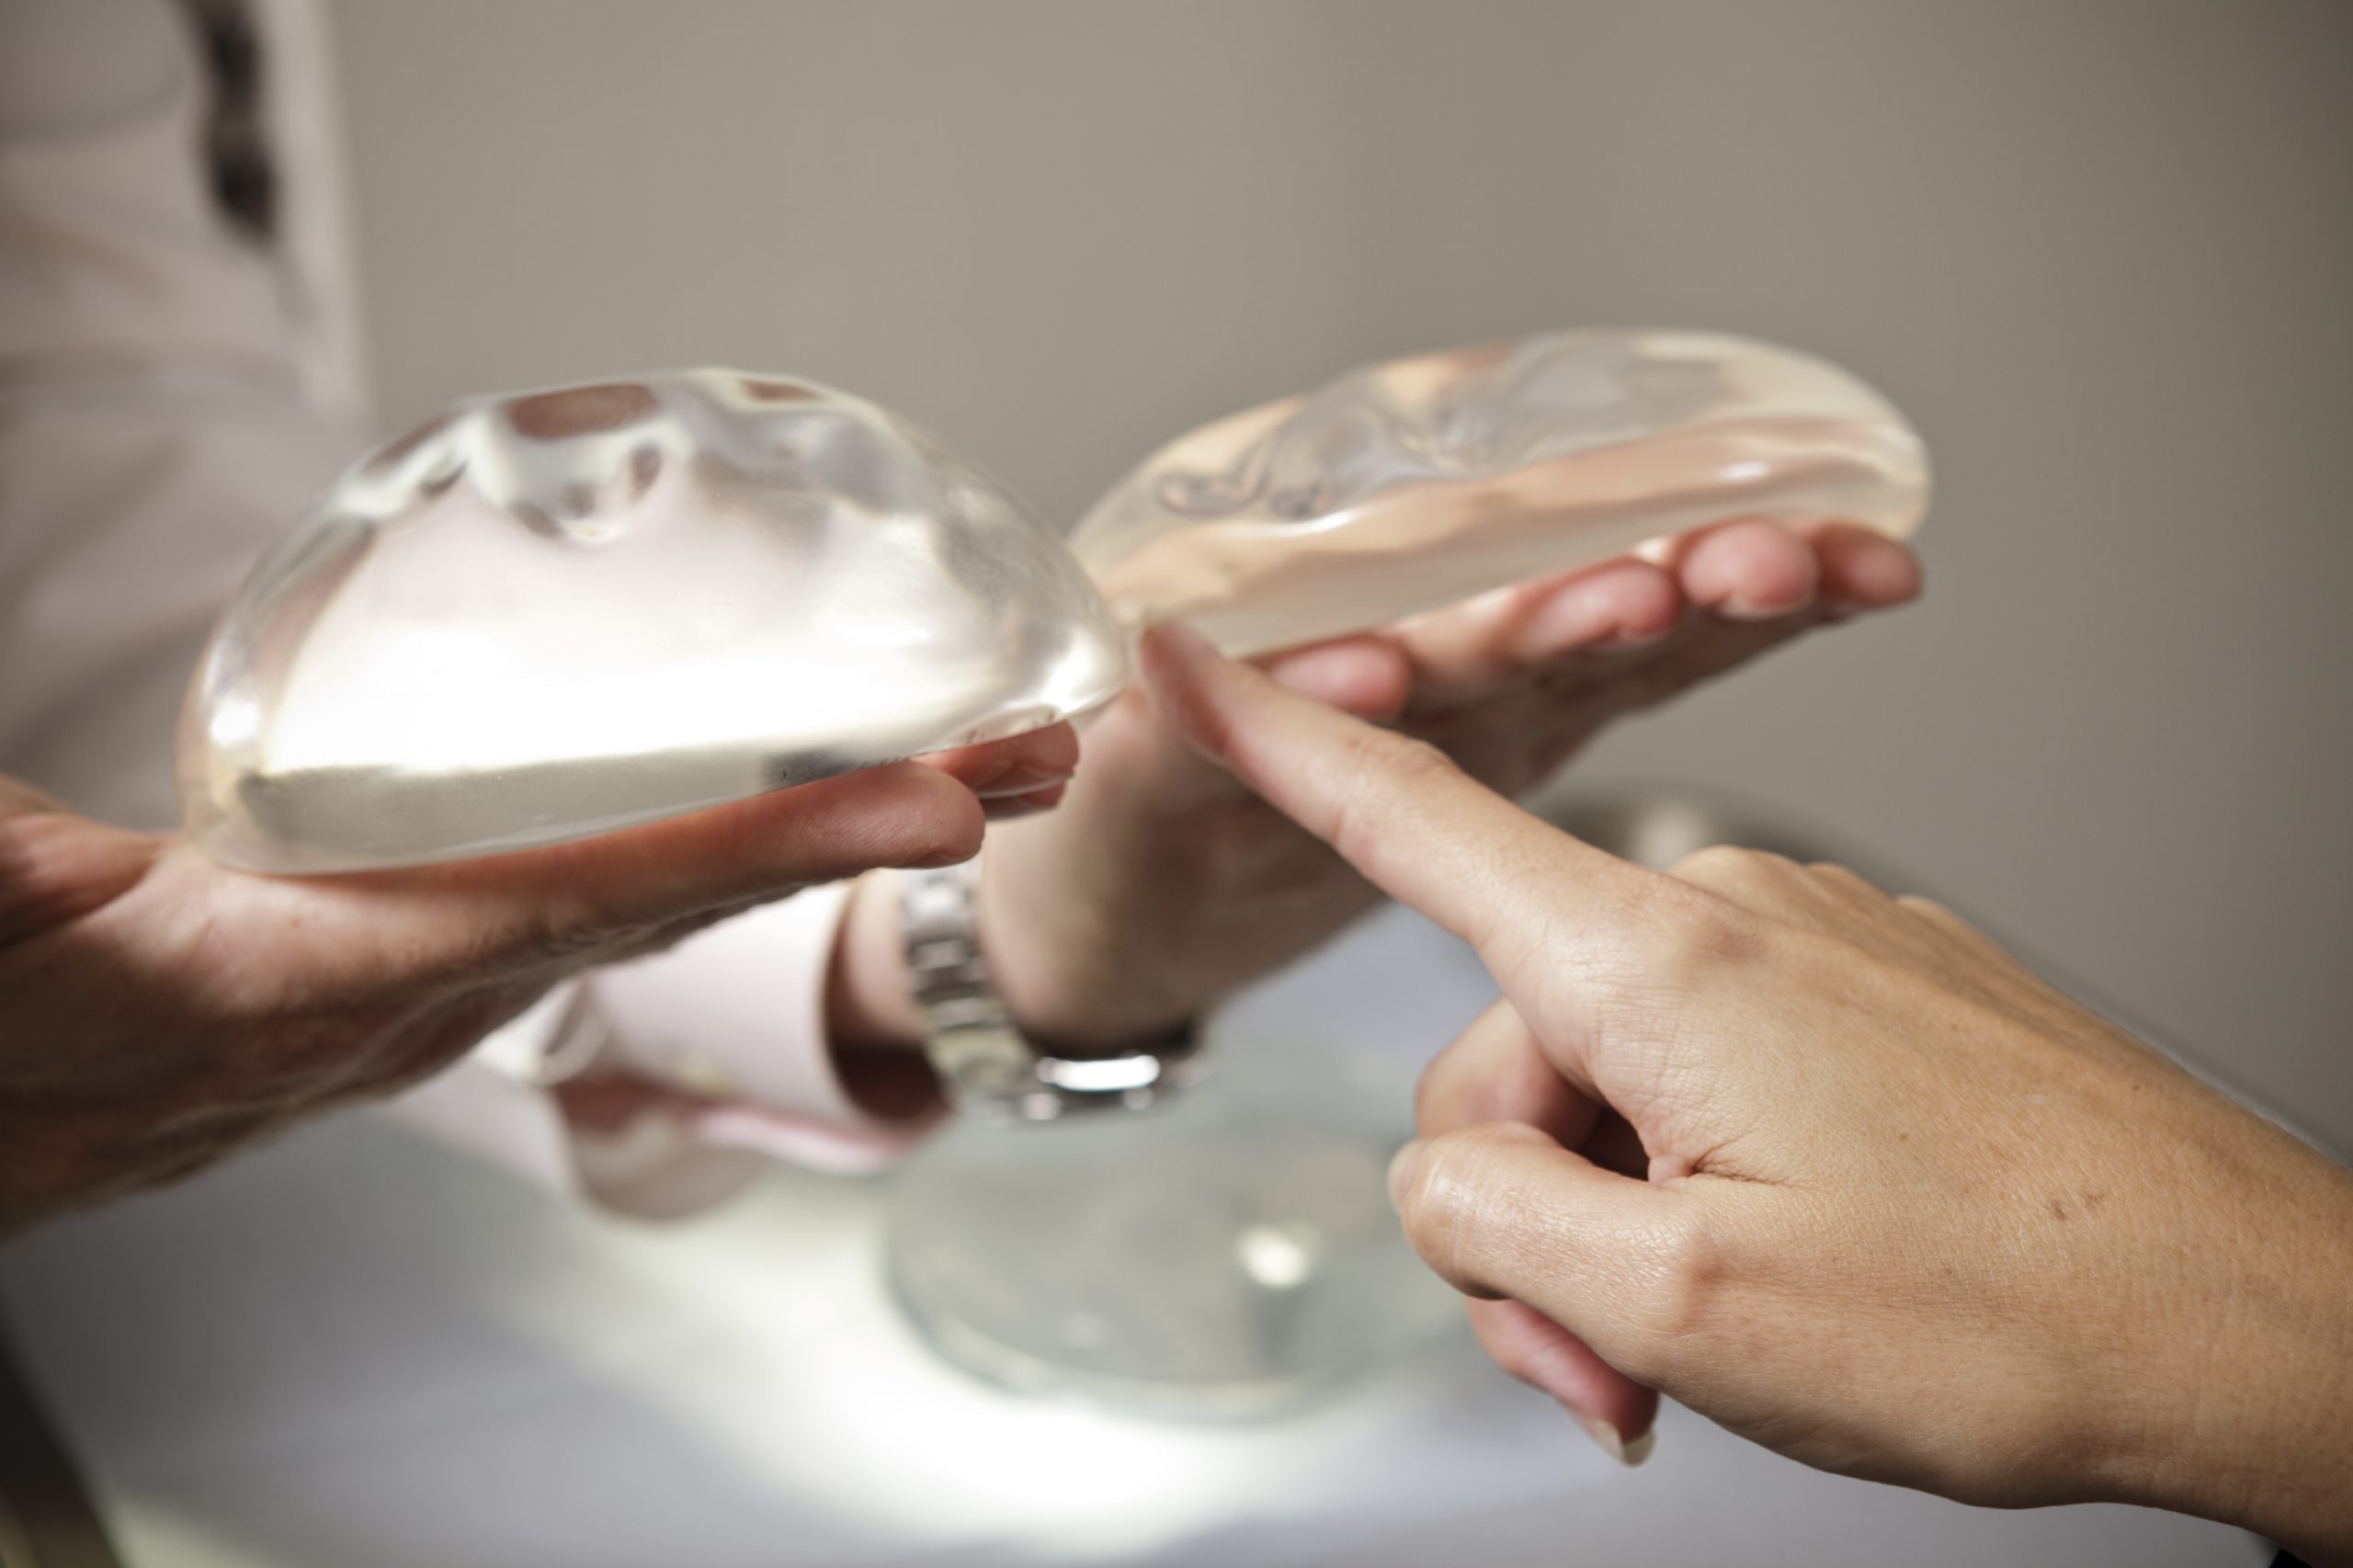 Selecting breast implants